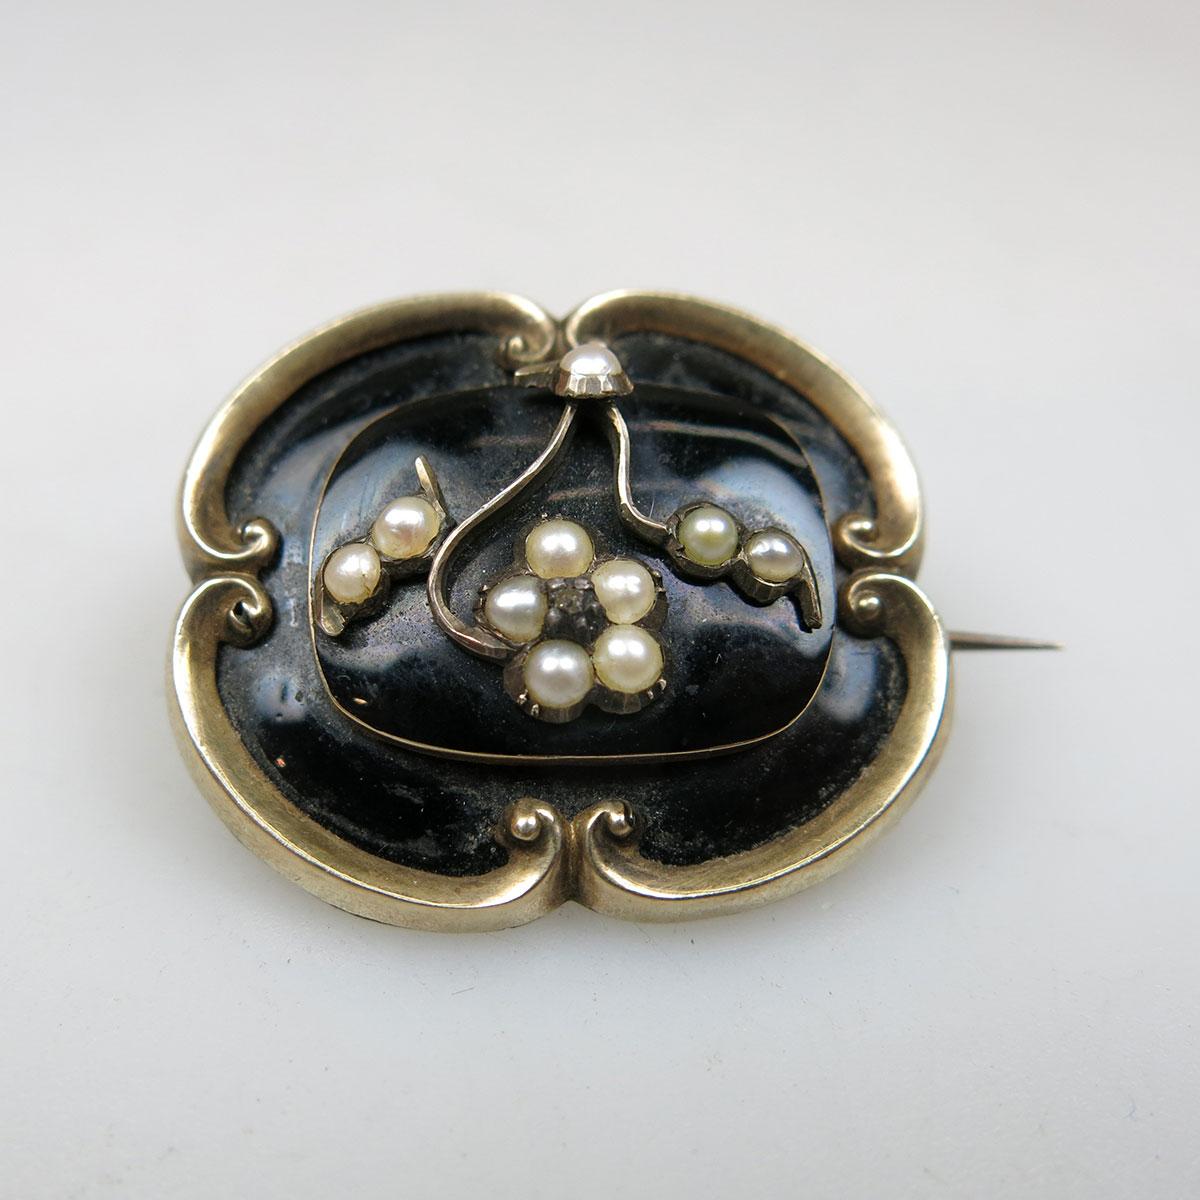 19th Century 14k Yellow Gold Mourning Brooch